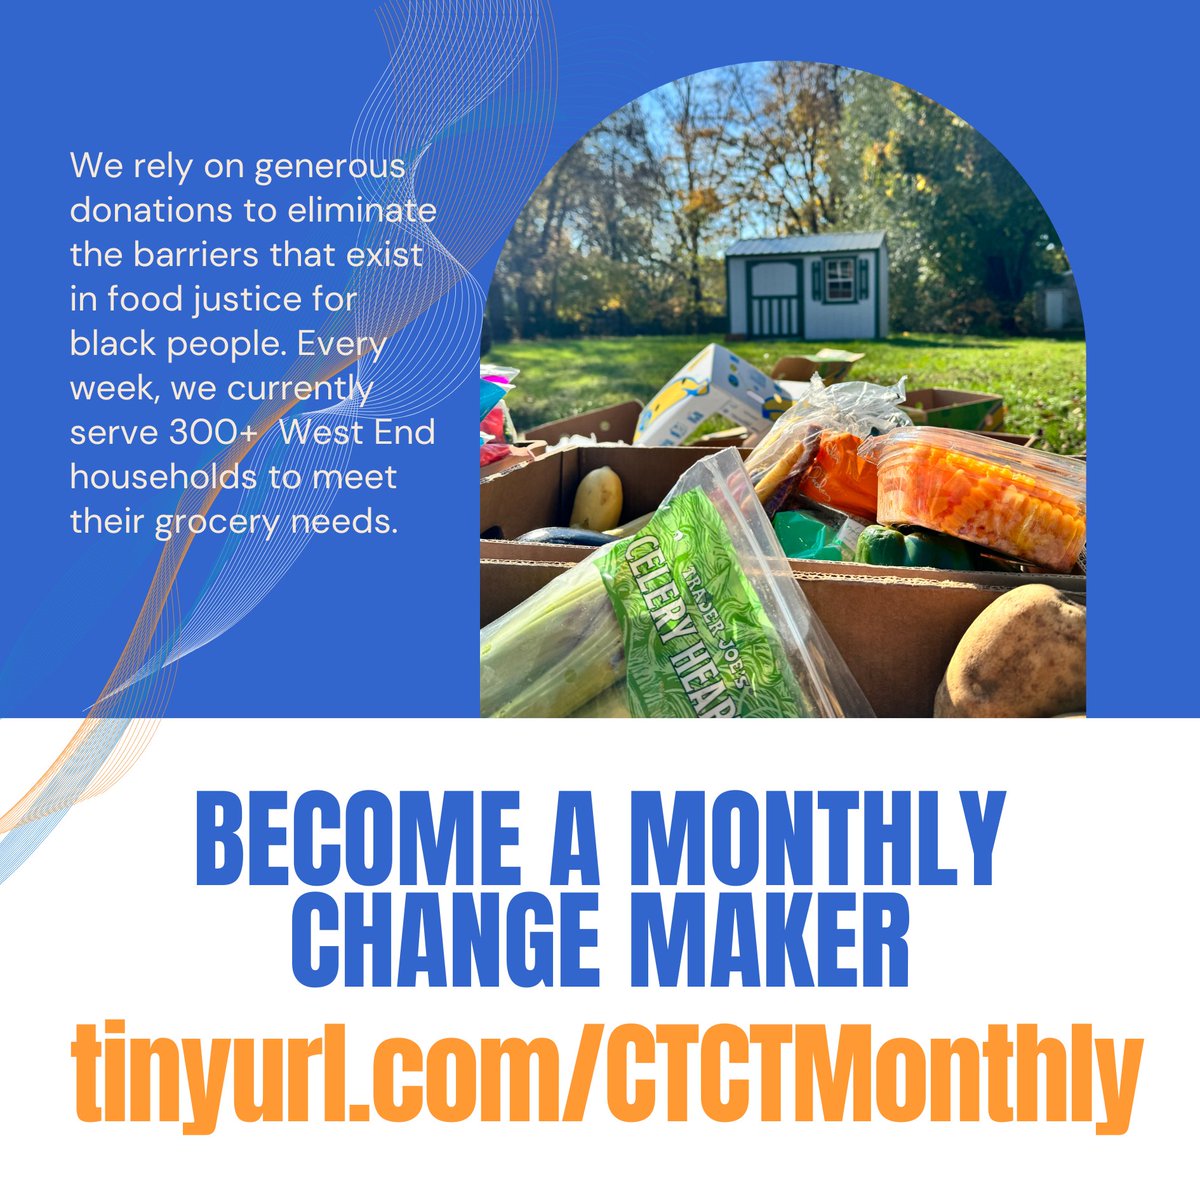 Did you know that we rely on your generous donations to eliminate the barriers that exist in food justice for black people? Every week, we serve 300+ West End households to meet their grocery needs. Will you consider becoming a monthly Change Maker at tinyurl.com/CTCTMonthly